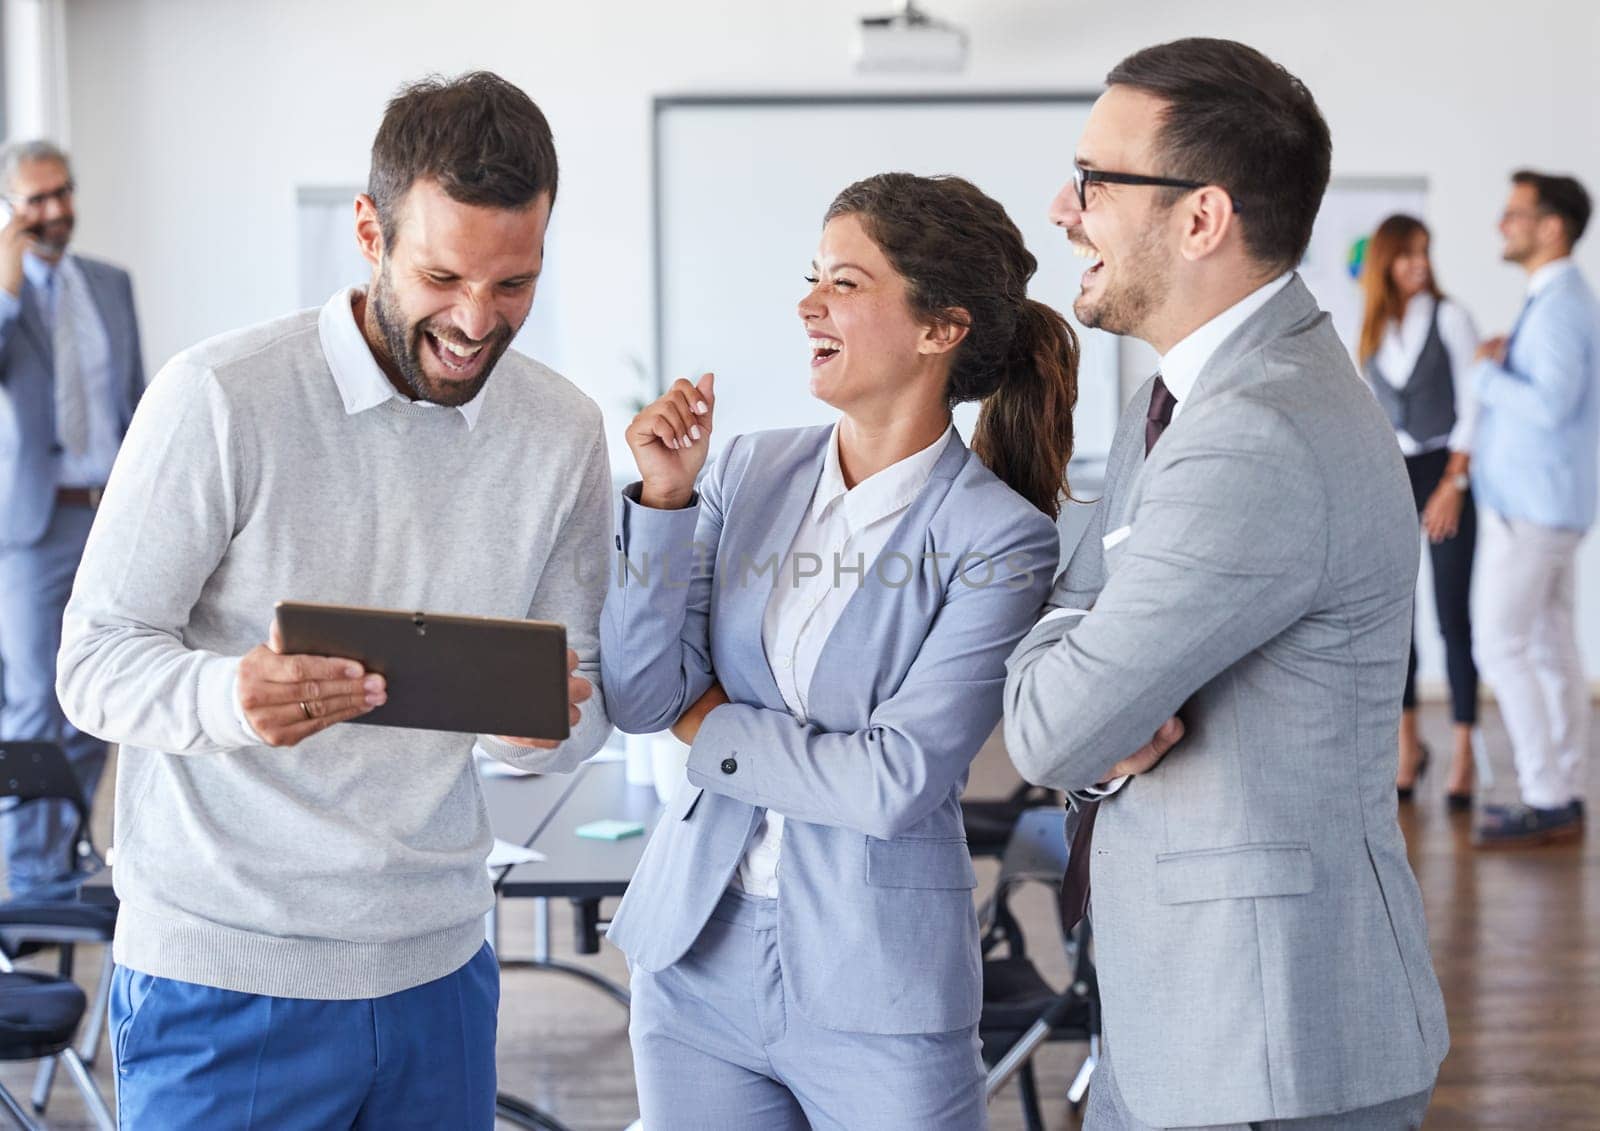 A portrait of a young businesspeople holding a tablet and smiling during a meeting and presentation in the office. Business concept